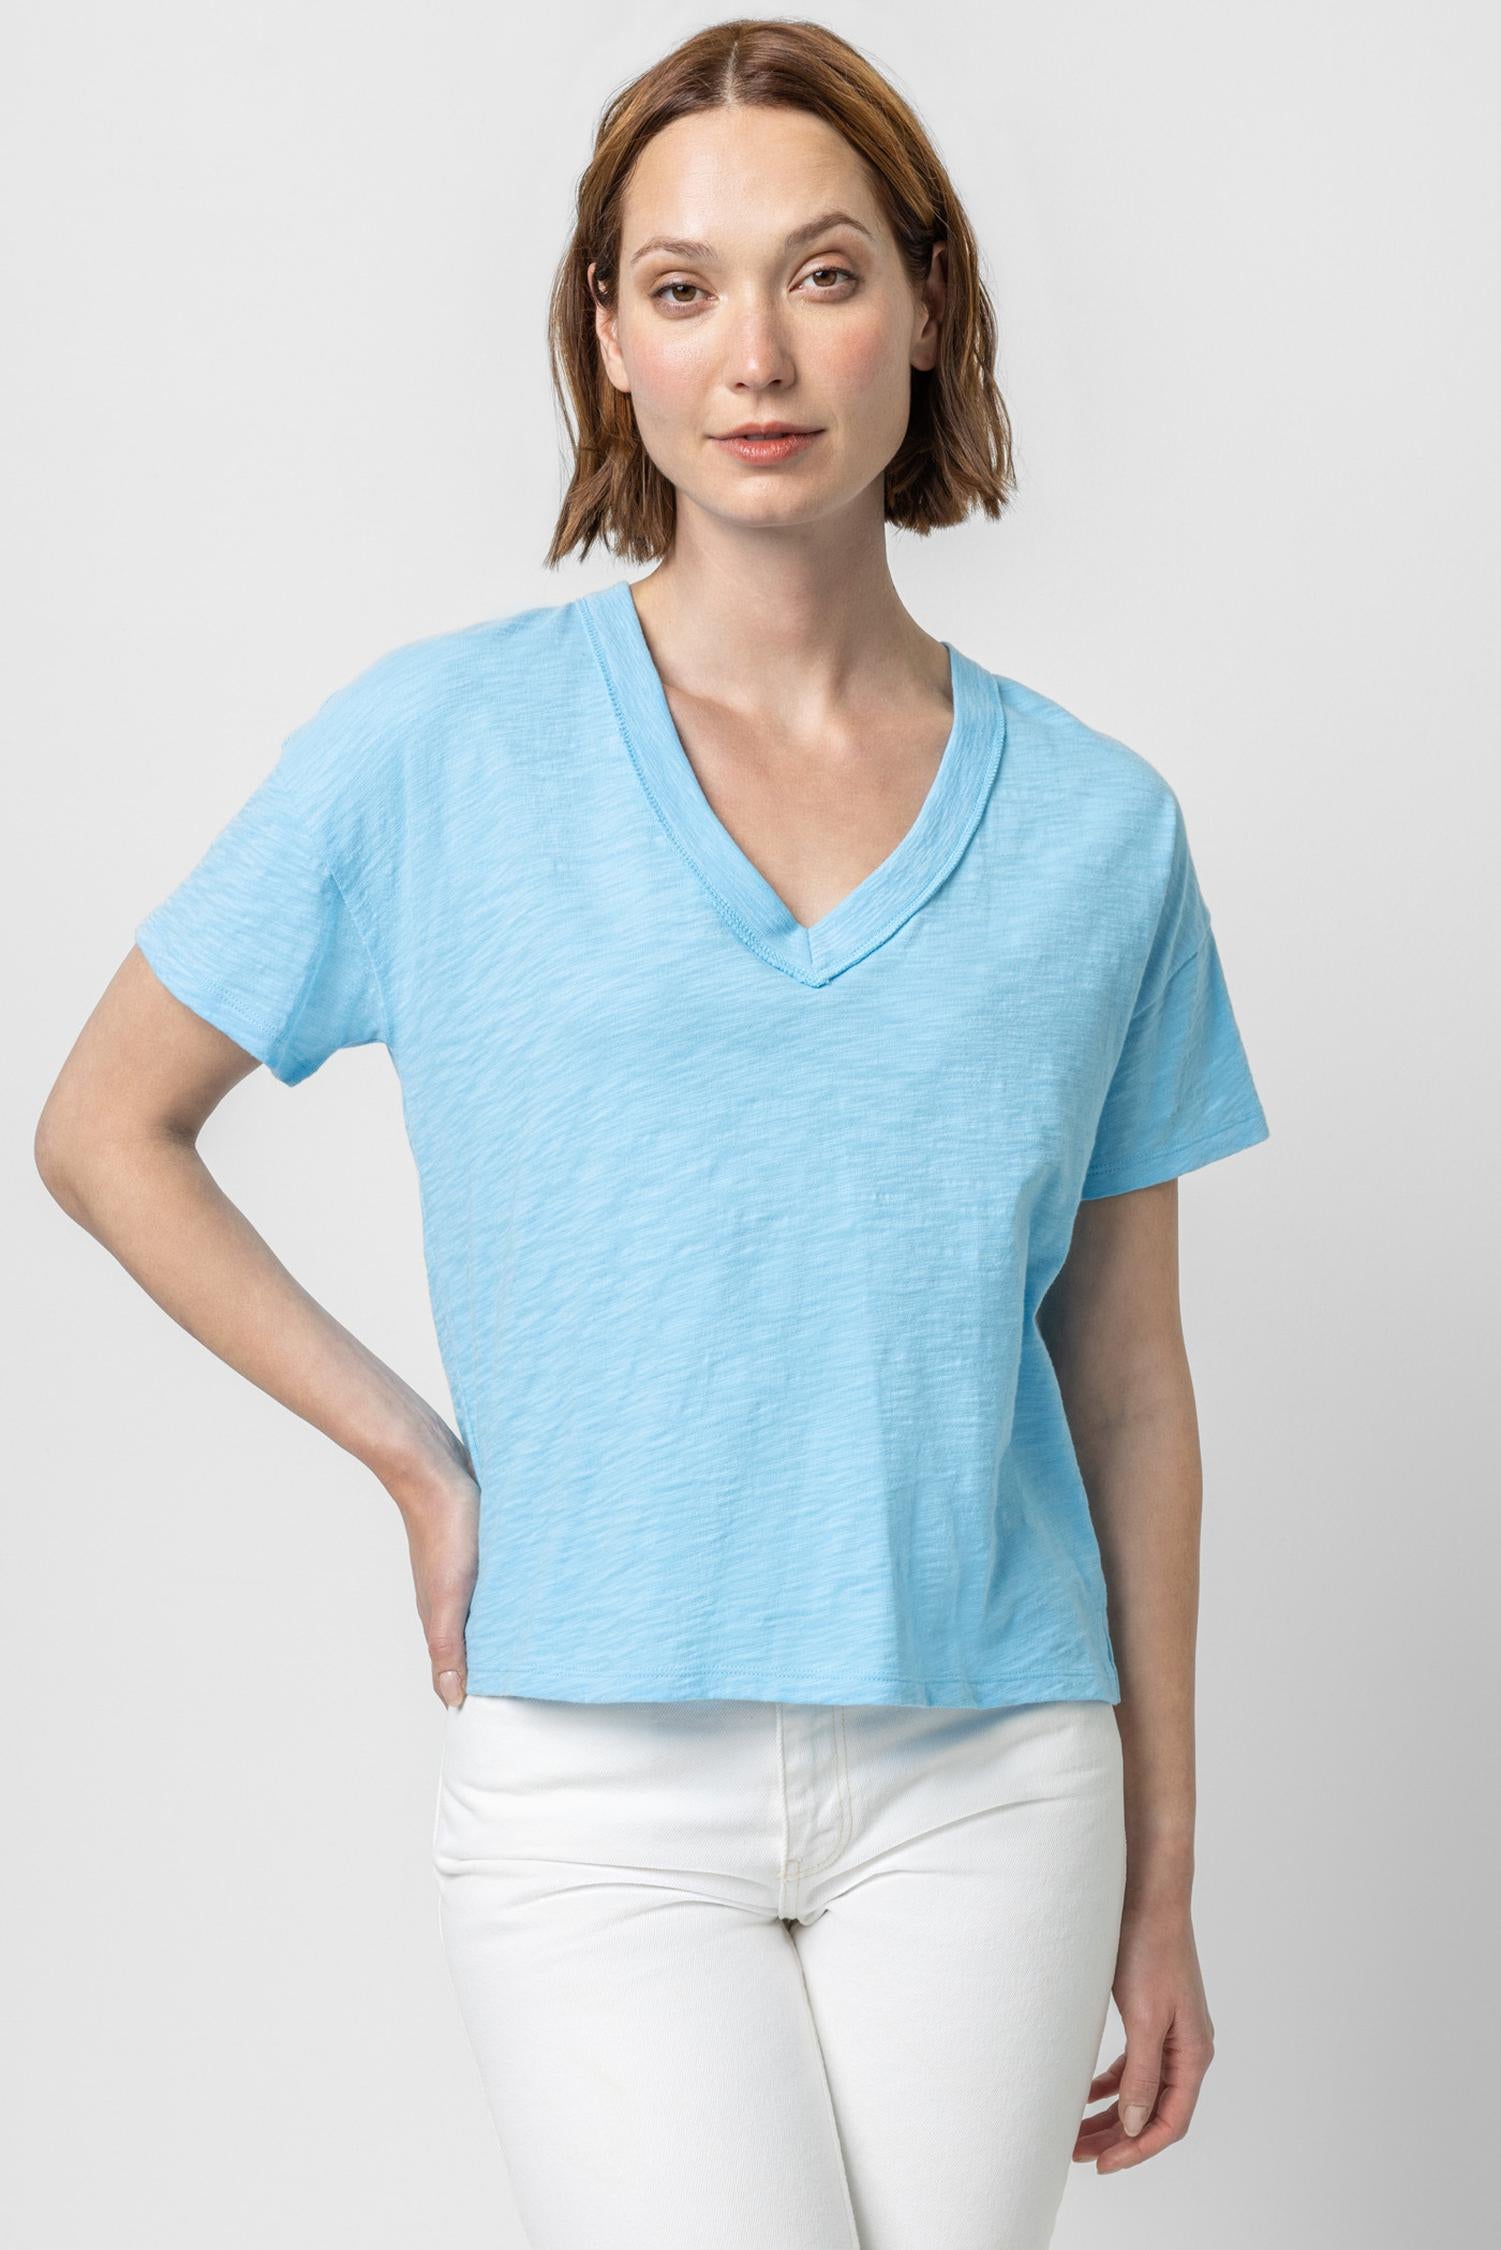 Short Sleeve V-Neck in Cloud Blue - Shirts for Tall Women